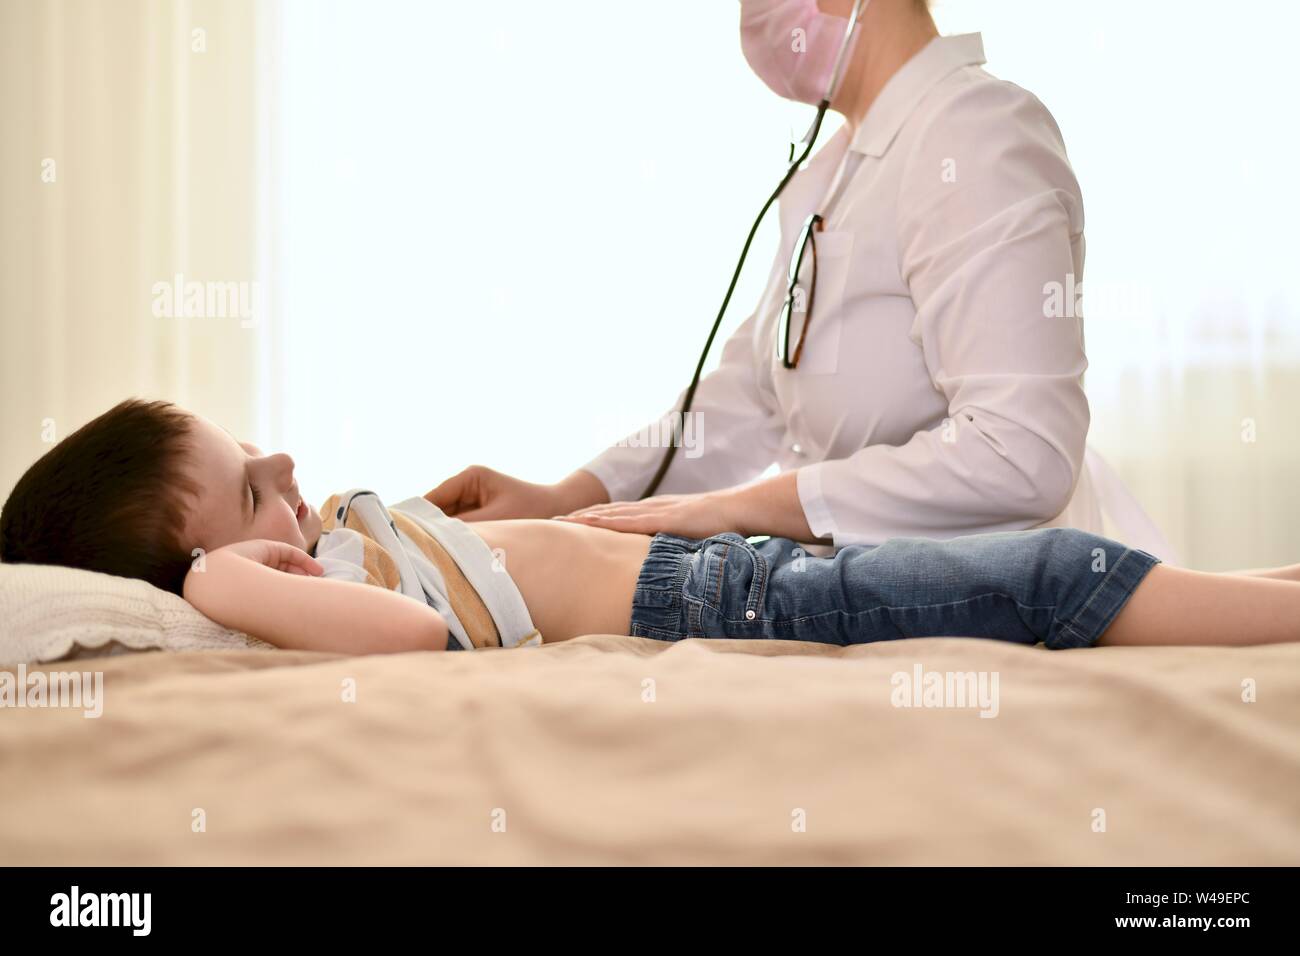 A doctor listens with a stethoscope to the heartbeat and breath of a smiling boy. The baby is at home on the bed, the doctor is sitting nearby. Stock Photo